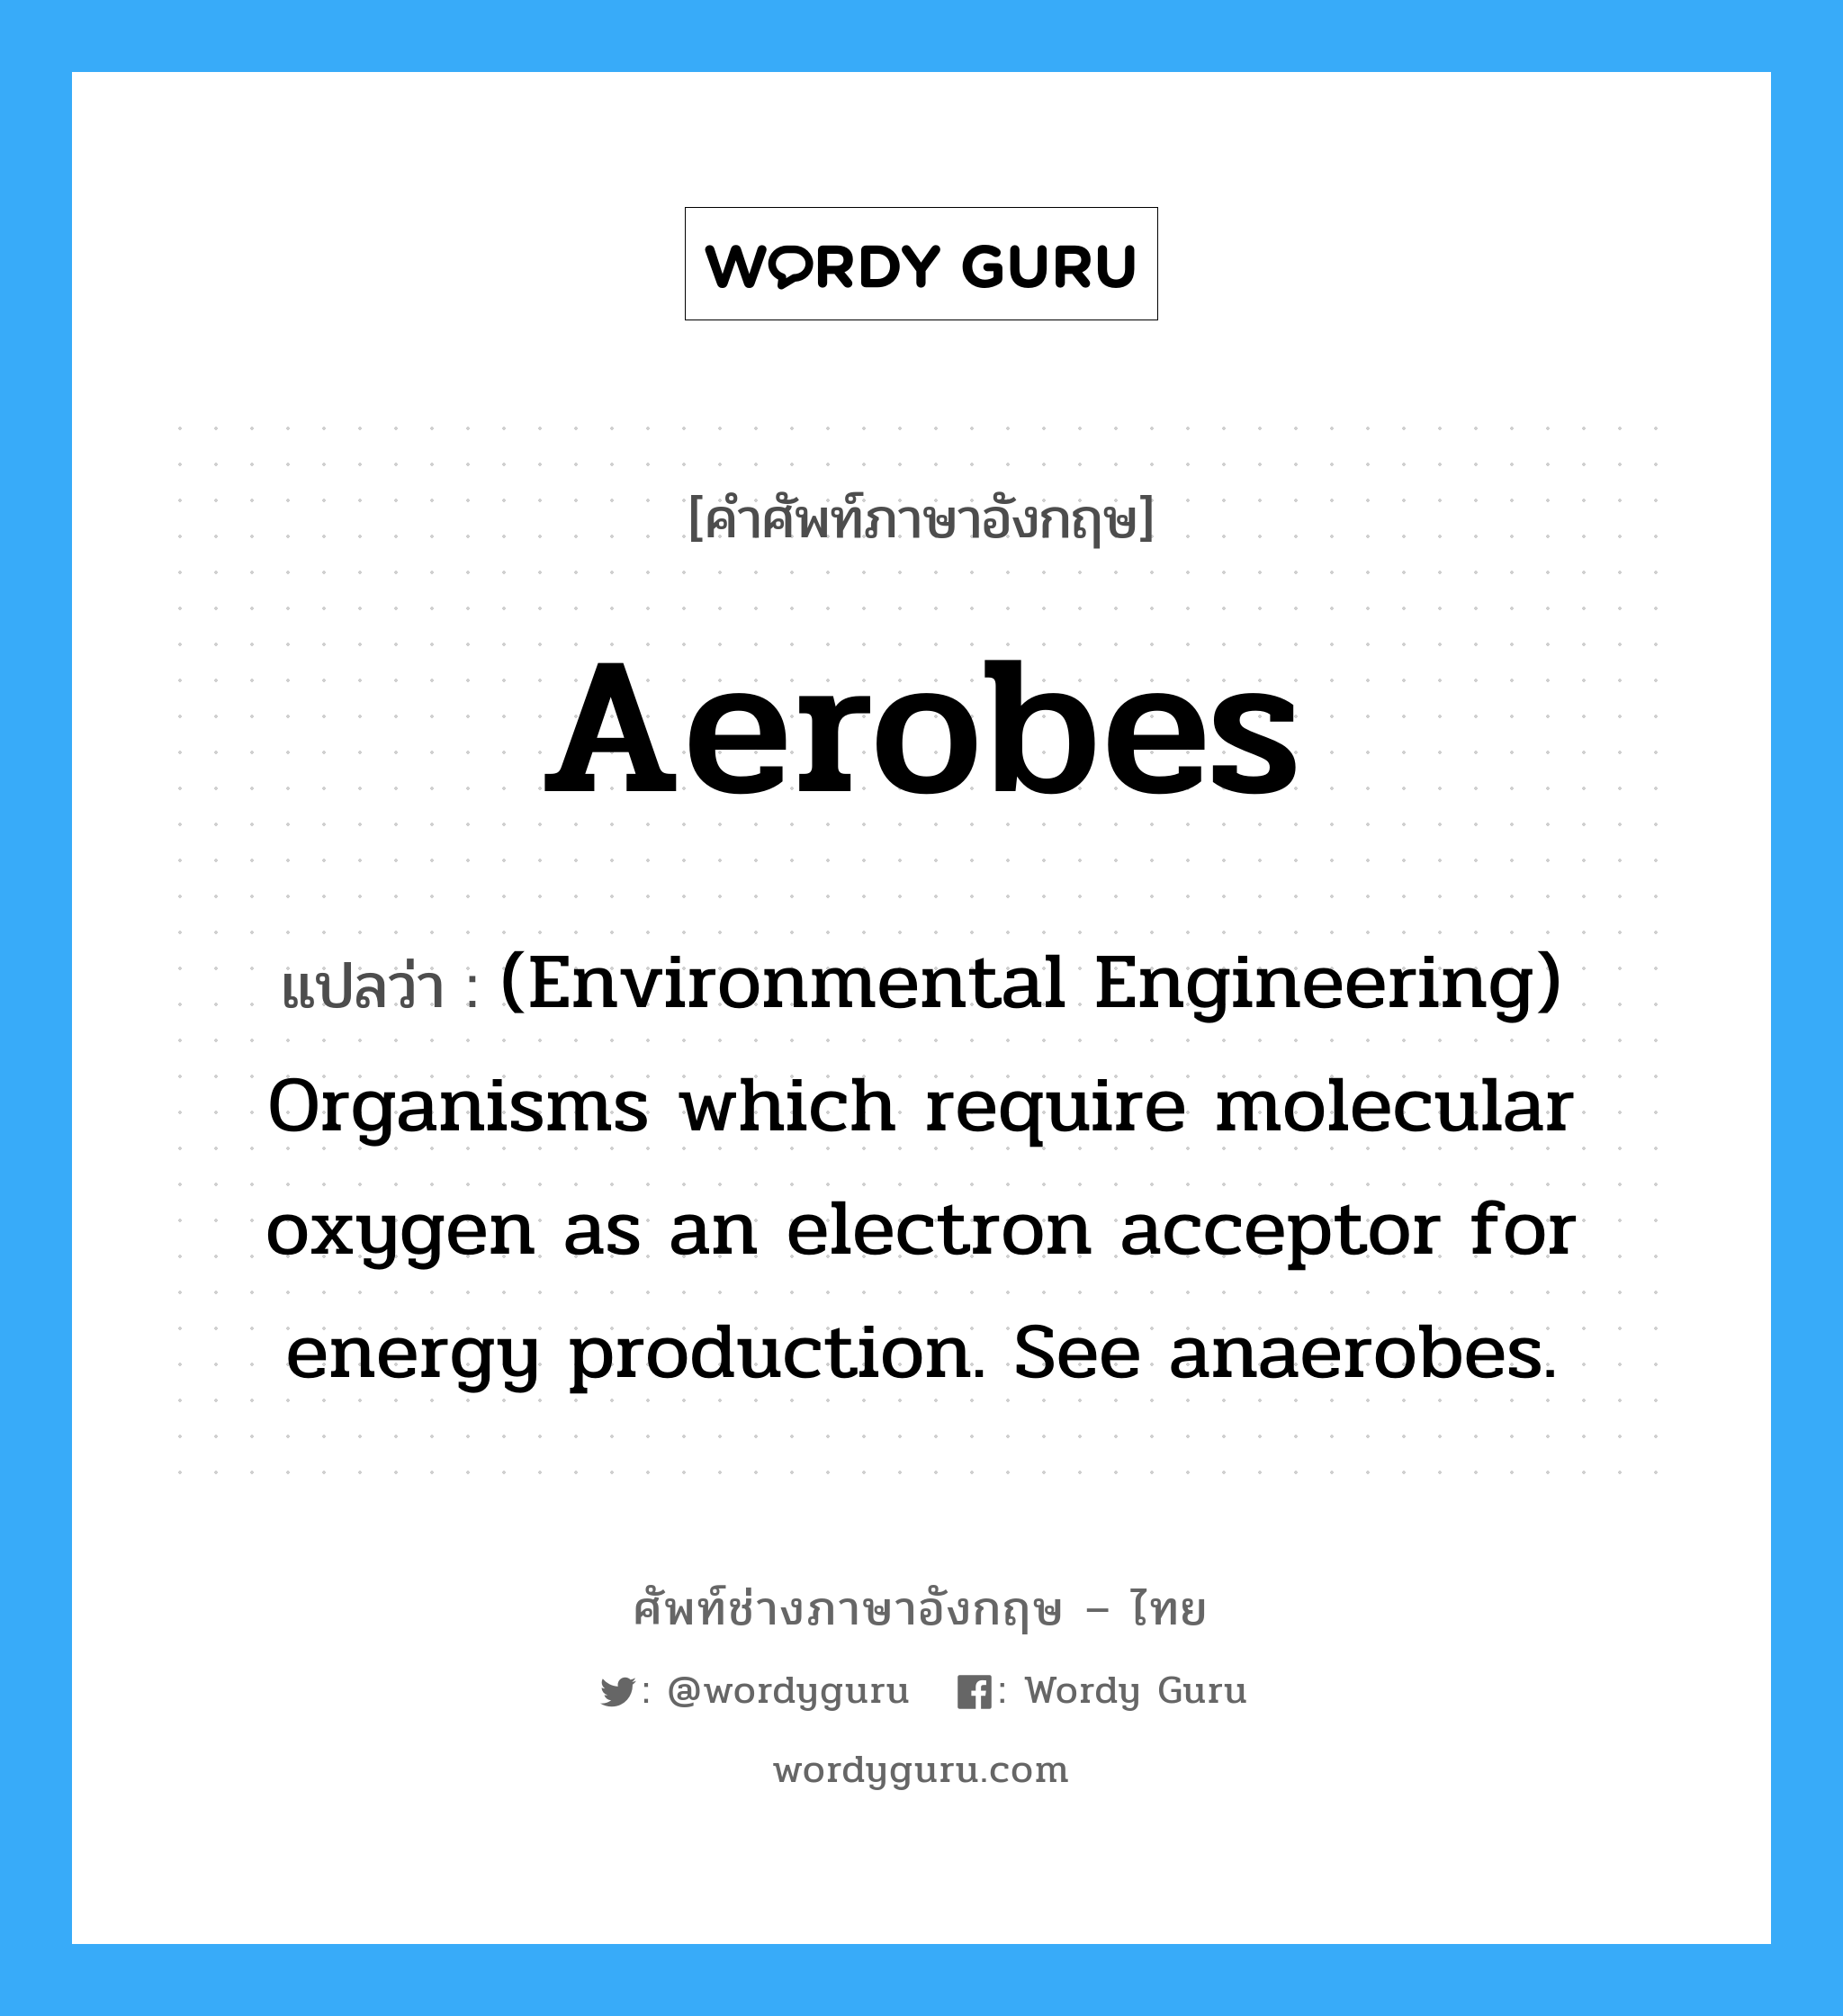 Aerobes แปลว่า?, คำศัพท์ช่างภาษาอังกฤษ - ไทย Aerobes คำศัพท์ภาษาอังกฤษ Aerobes แปลว่า (Environmental Engineering) Organisms which require molecular oxygen as an electron acceptor for energy production. See anaerobes.